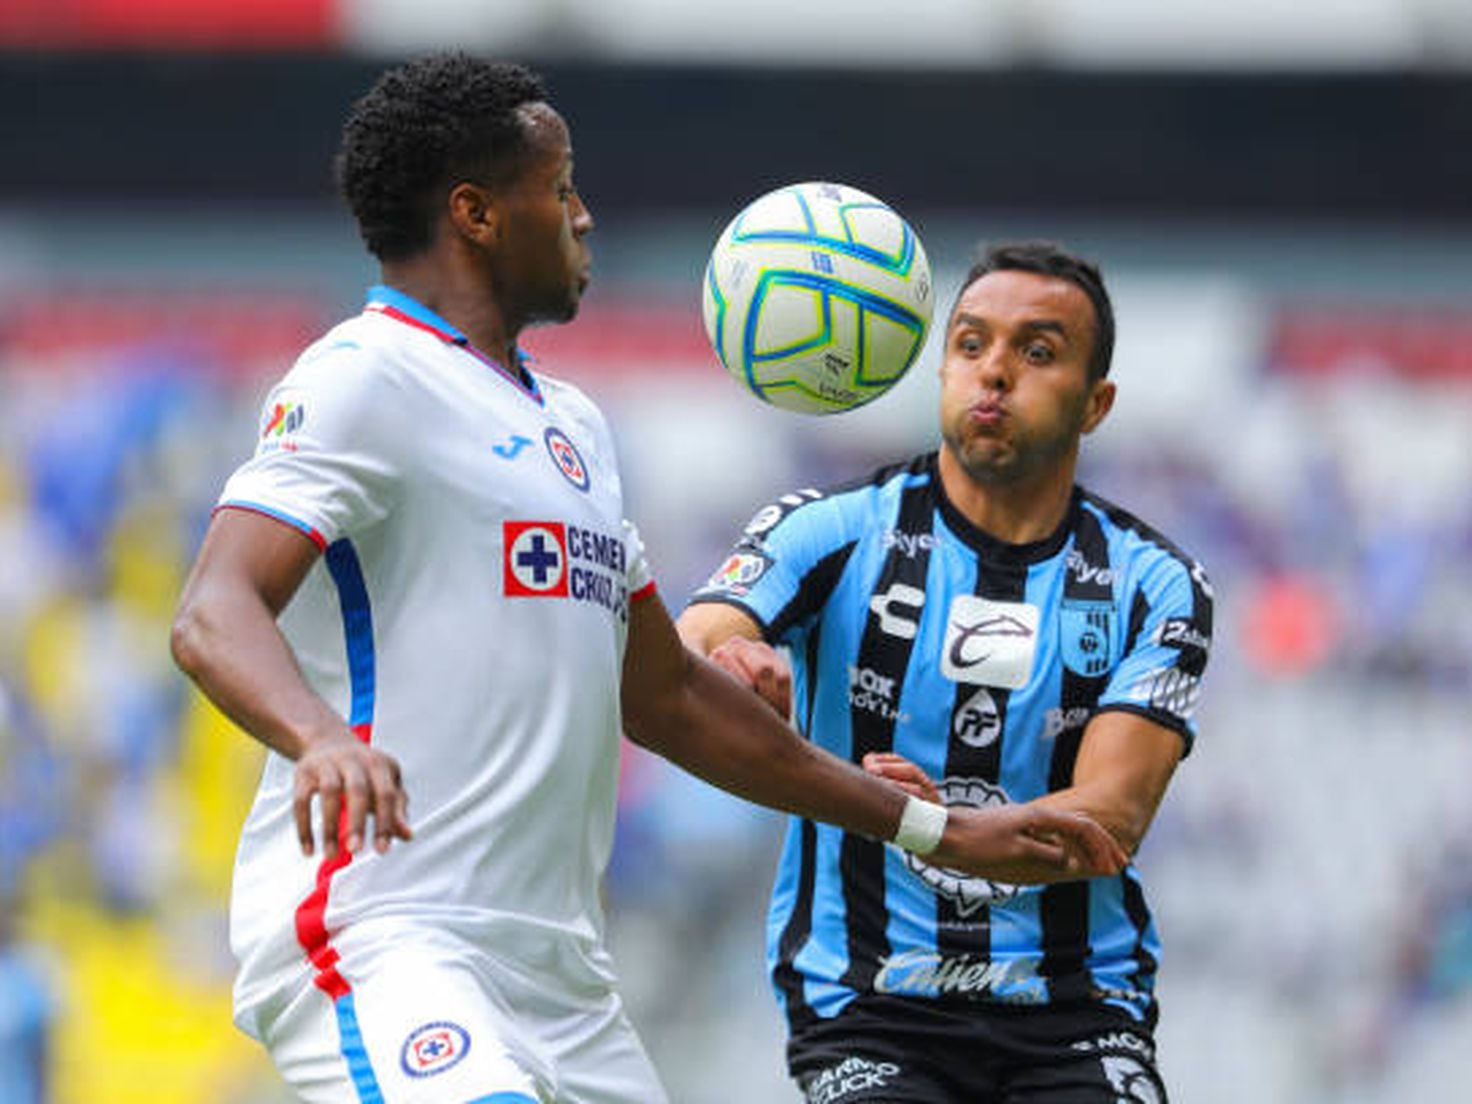 How to Watch Liga MX Streaming Live in the US Today - November 27